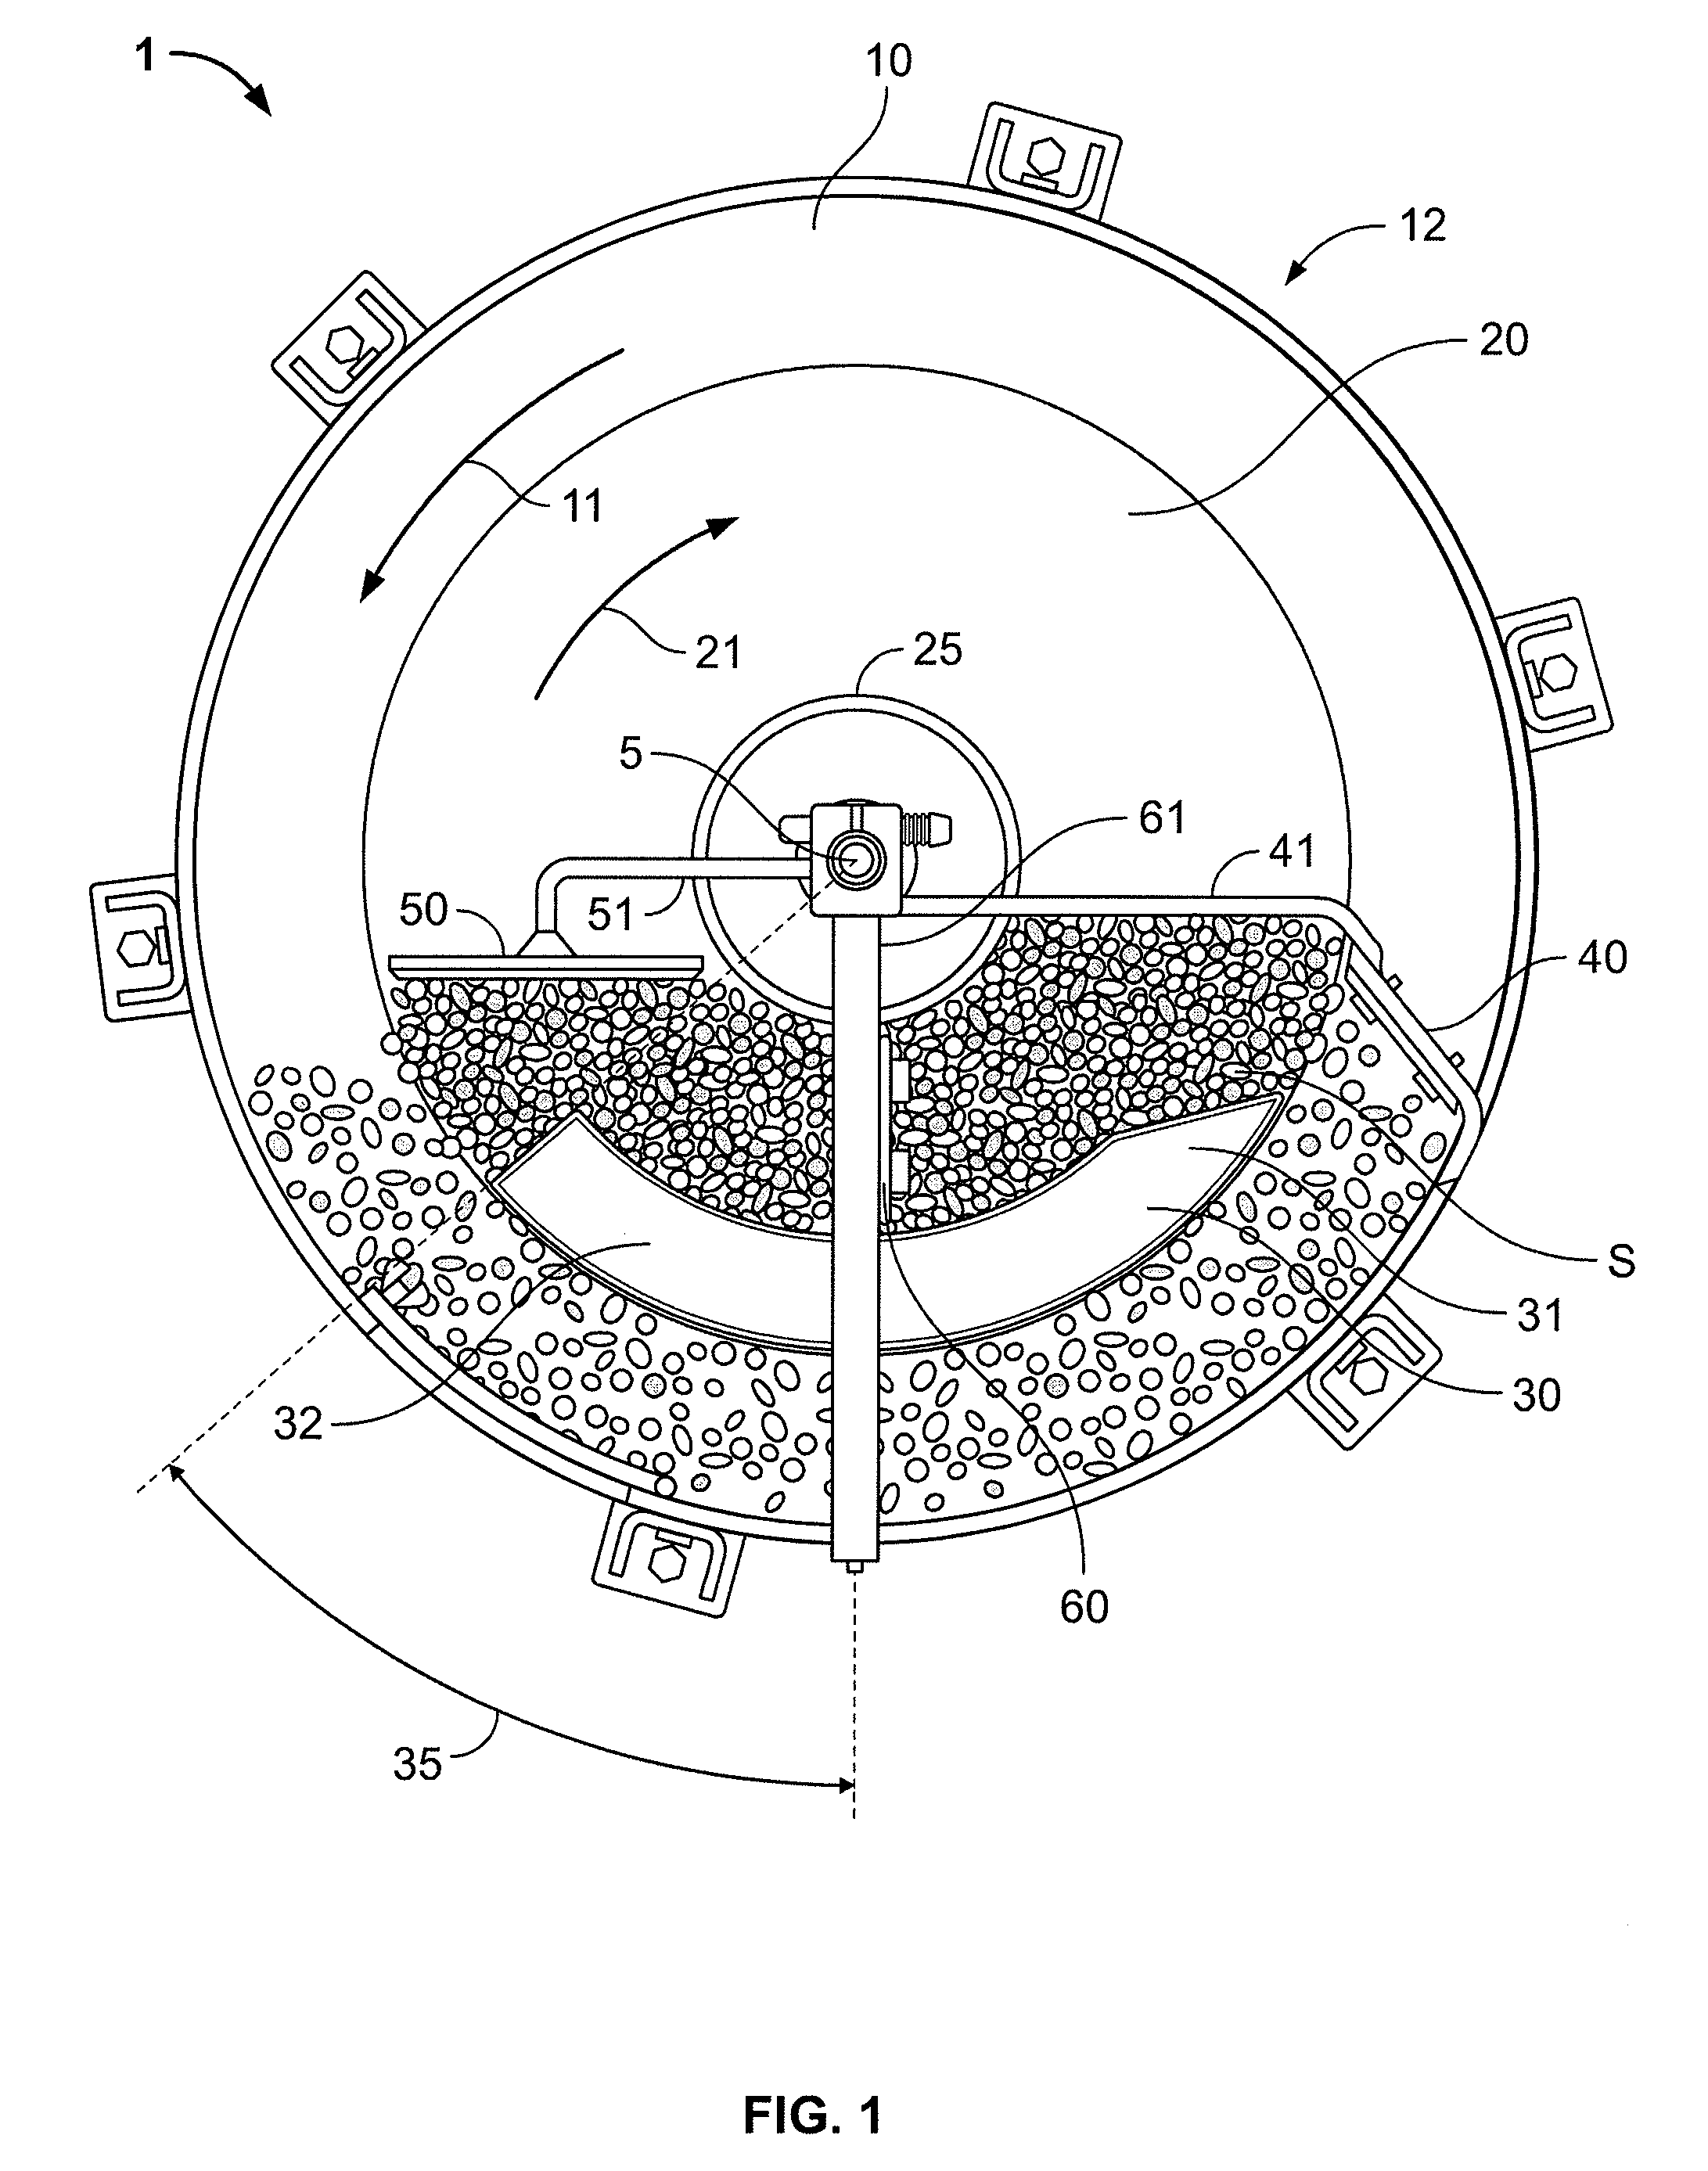 Apparatus and method for presenting a particulate sample to the scanning field of a sensor device